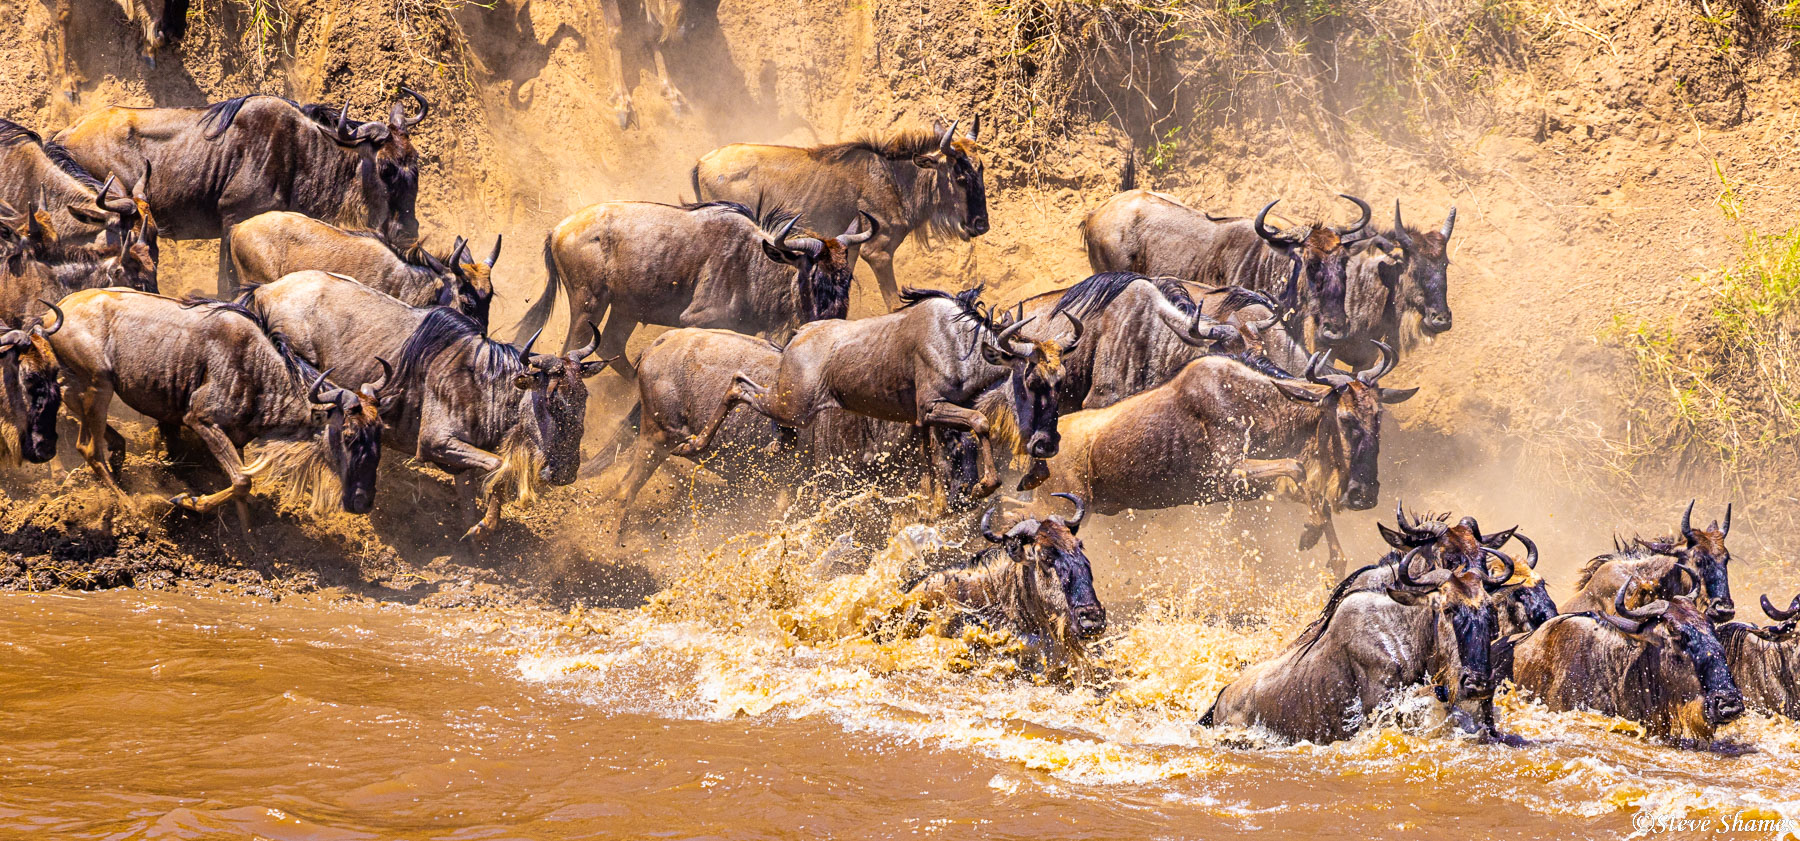 Its always exciting to see the wildebeests jumping into the river.